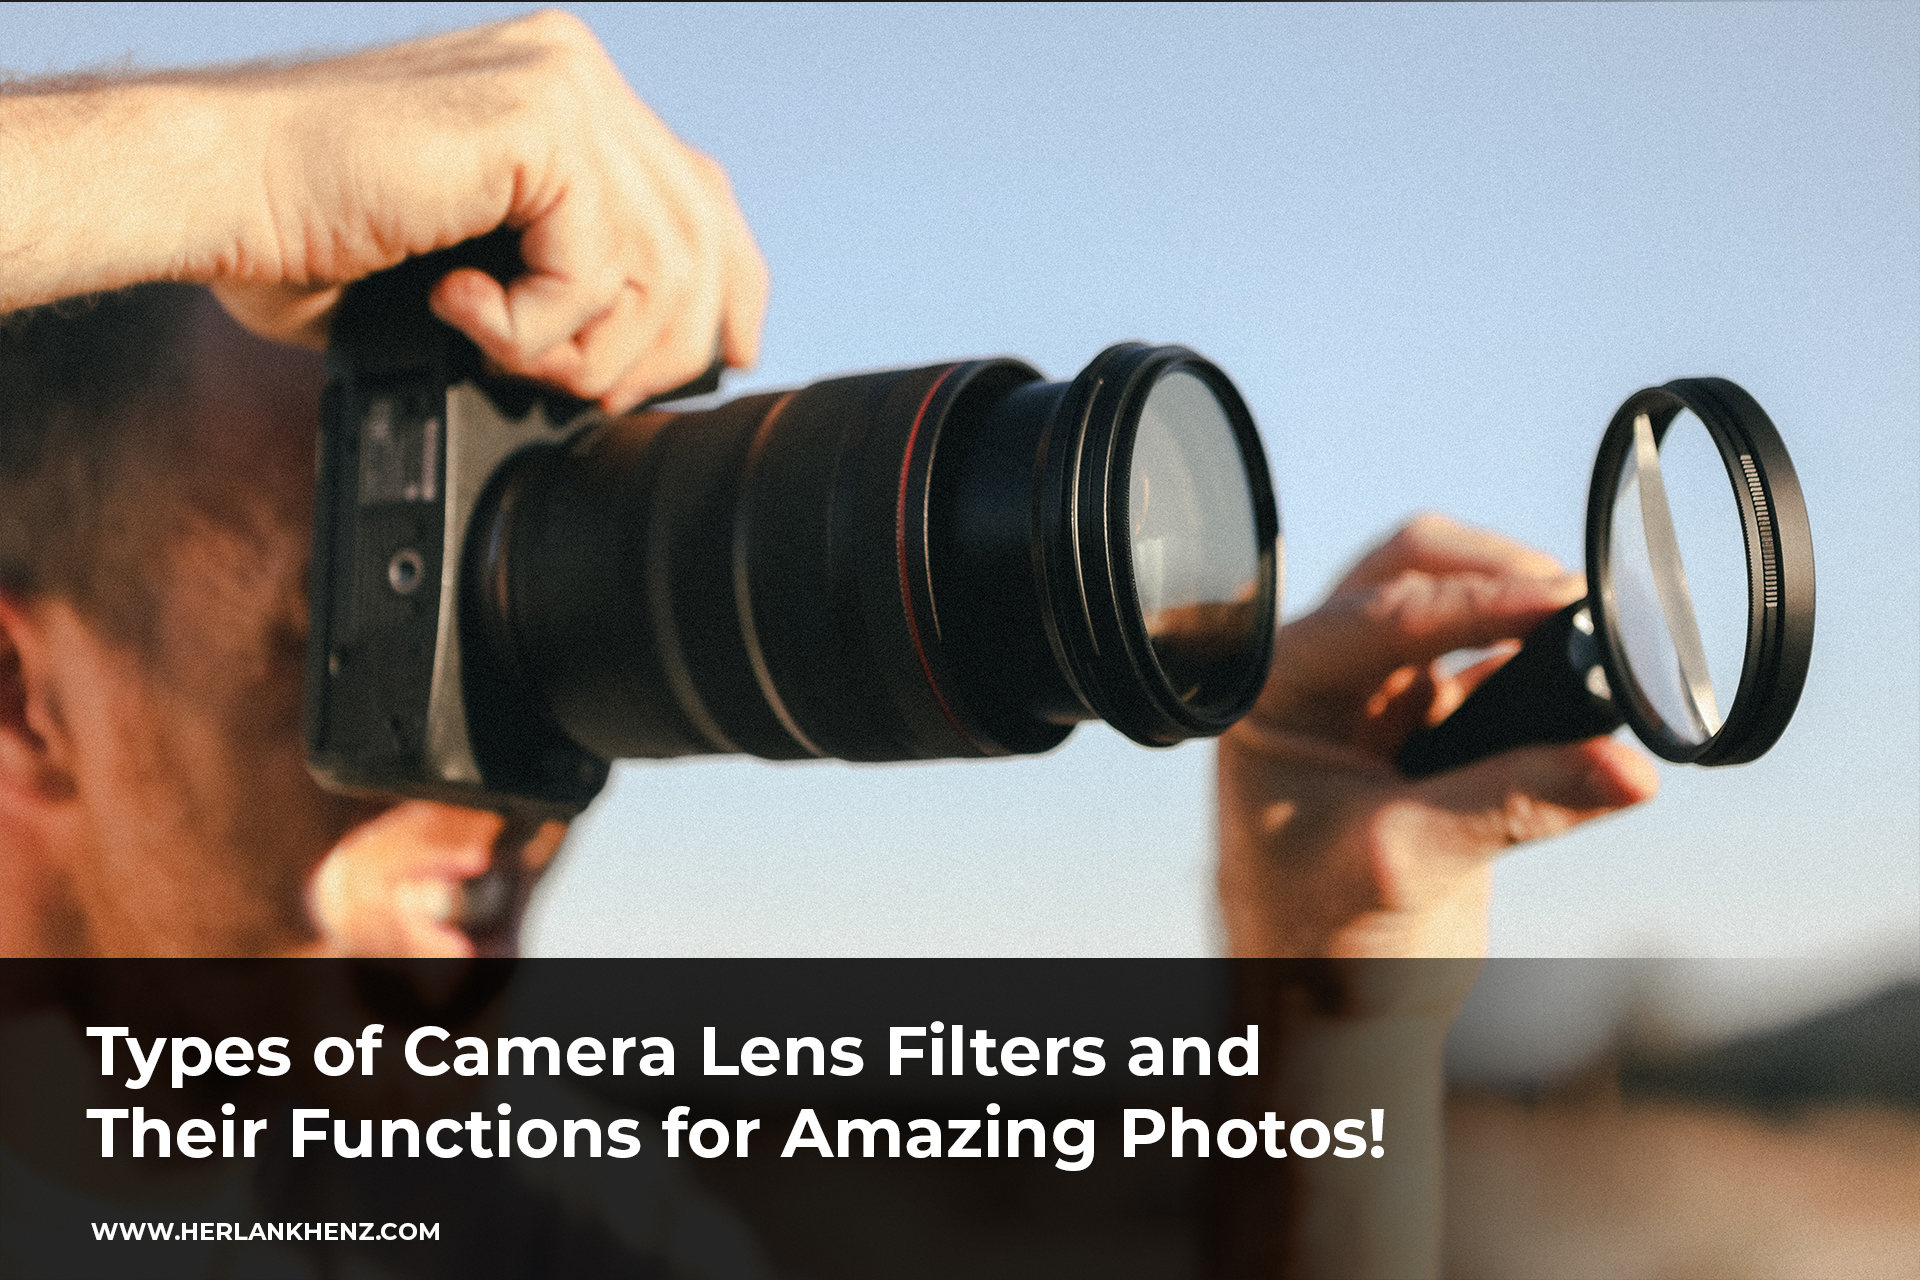 Know the Types of Camera Lens Filters and Their Functions for Amazing Photos!